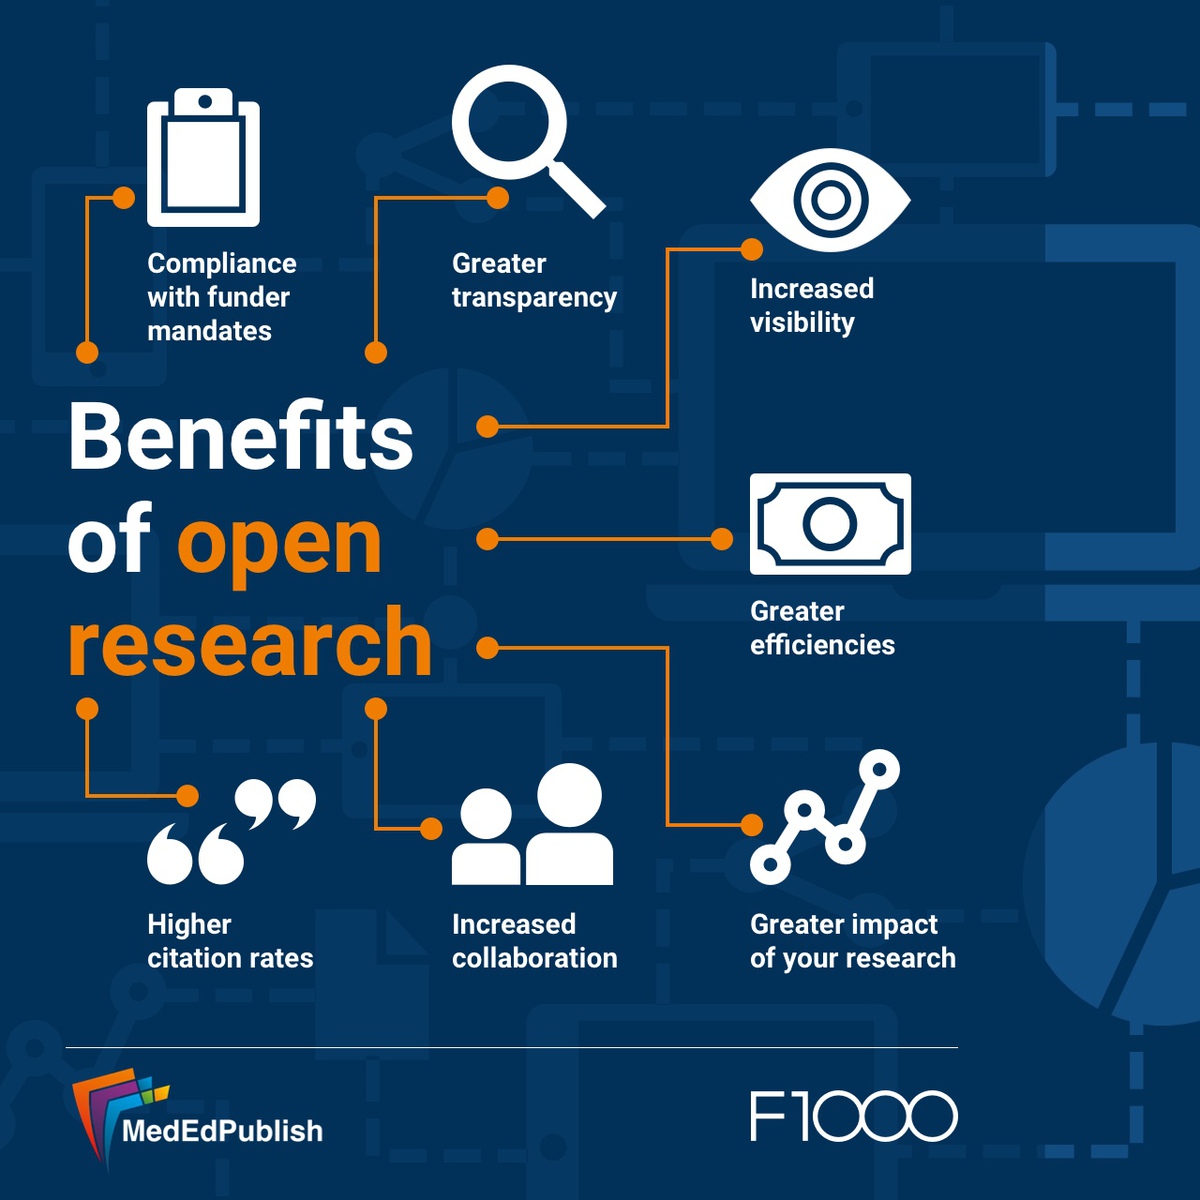 MedEdPublish uses @F1000’s innovative #OpenAccess publishing process so researchers can benefit from rapid publication, higher citation rates and increased research visibility. Submit today➡️ bit.ly/3xps2Mf